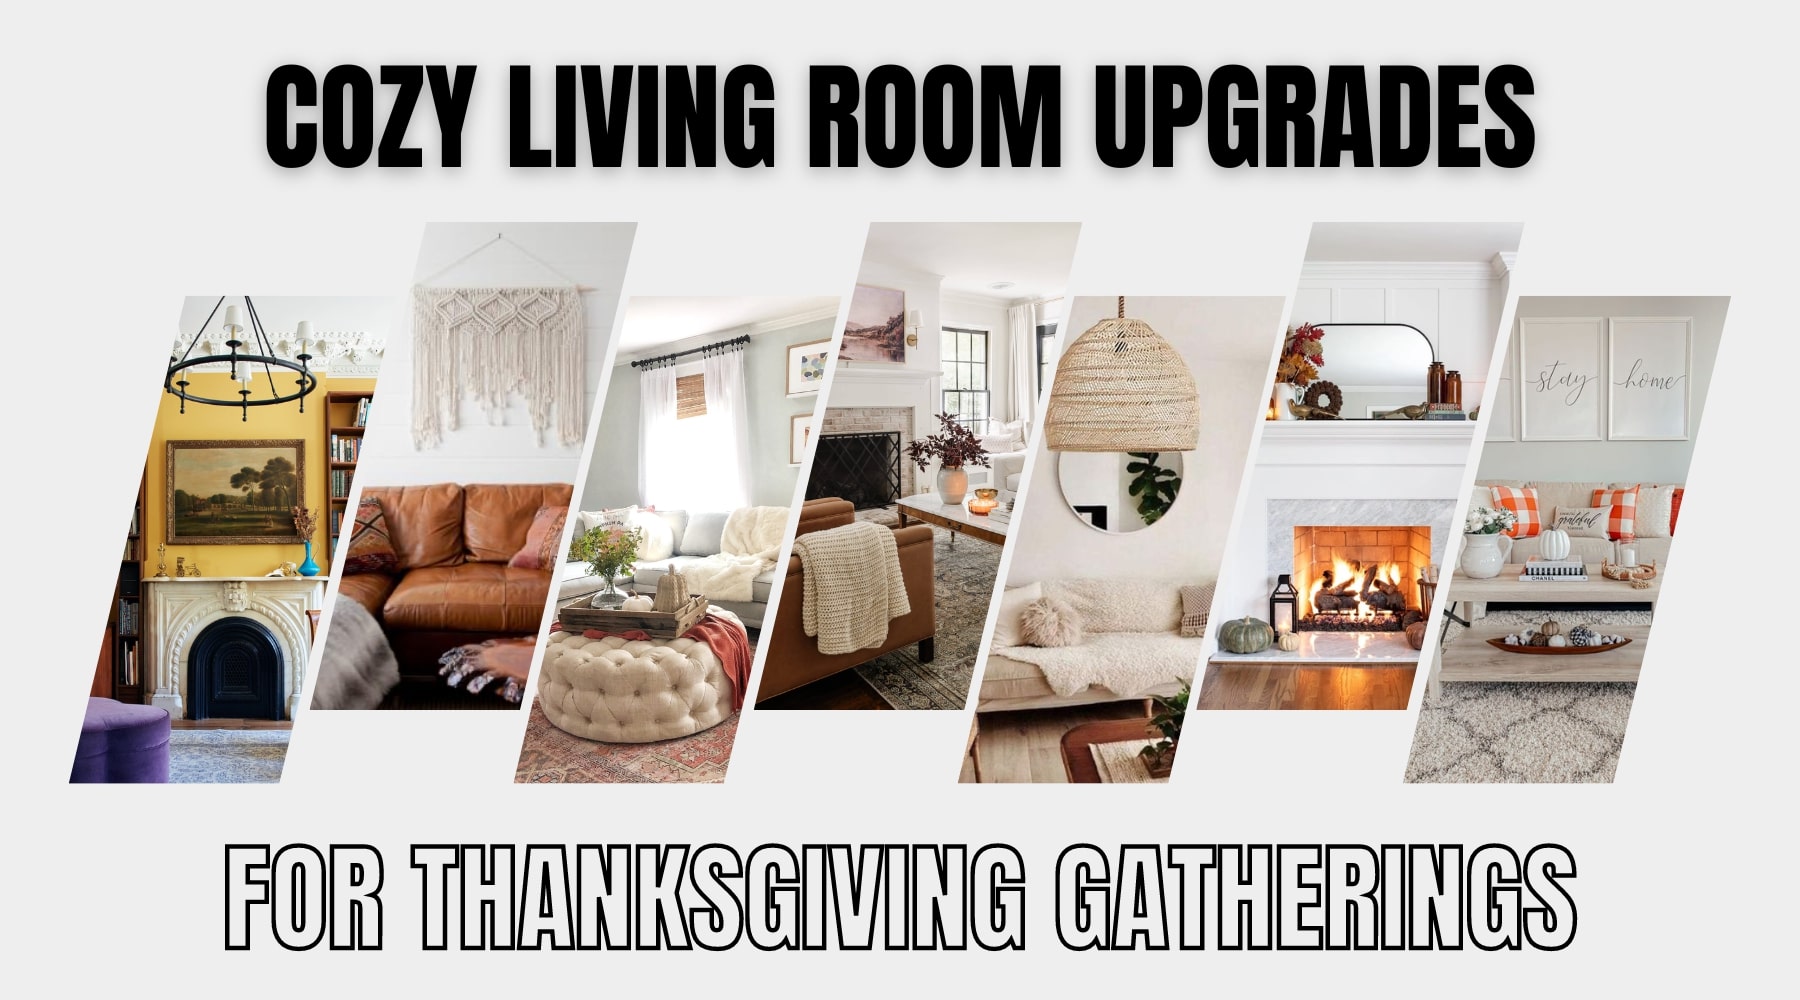 cozy living room upgrades for thanksgiving gatherings